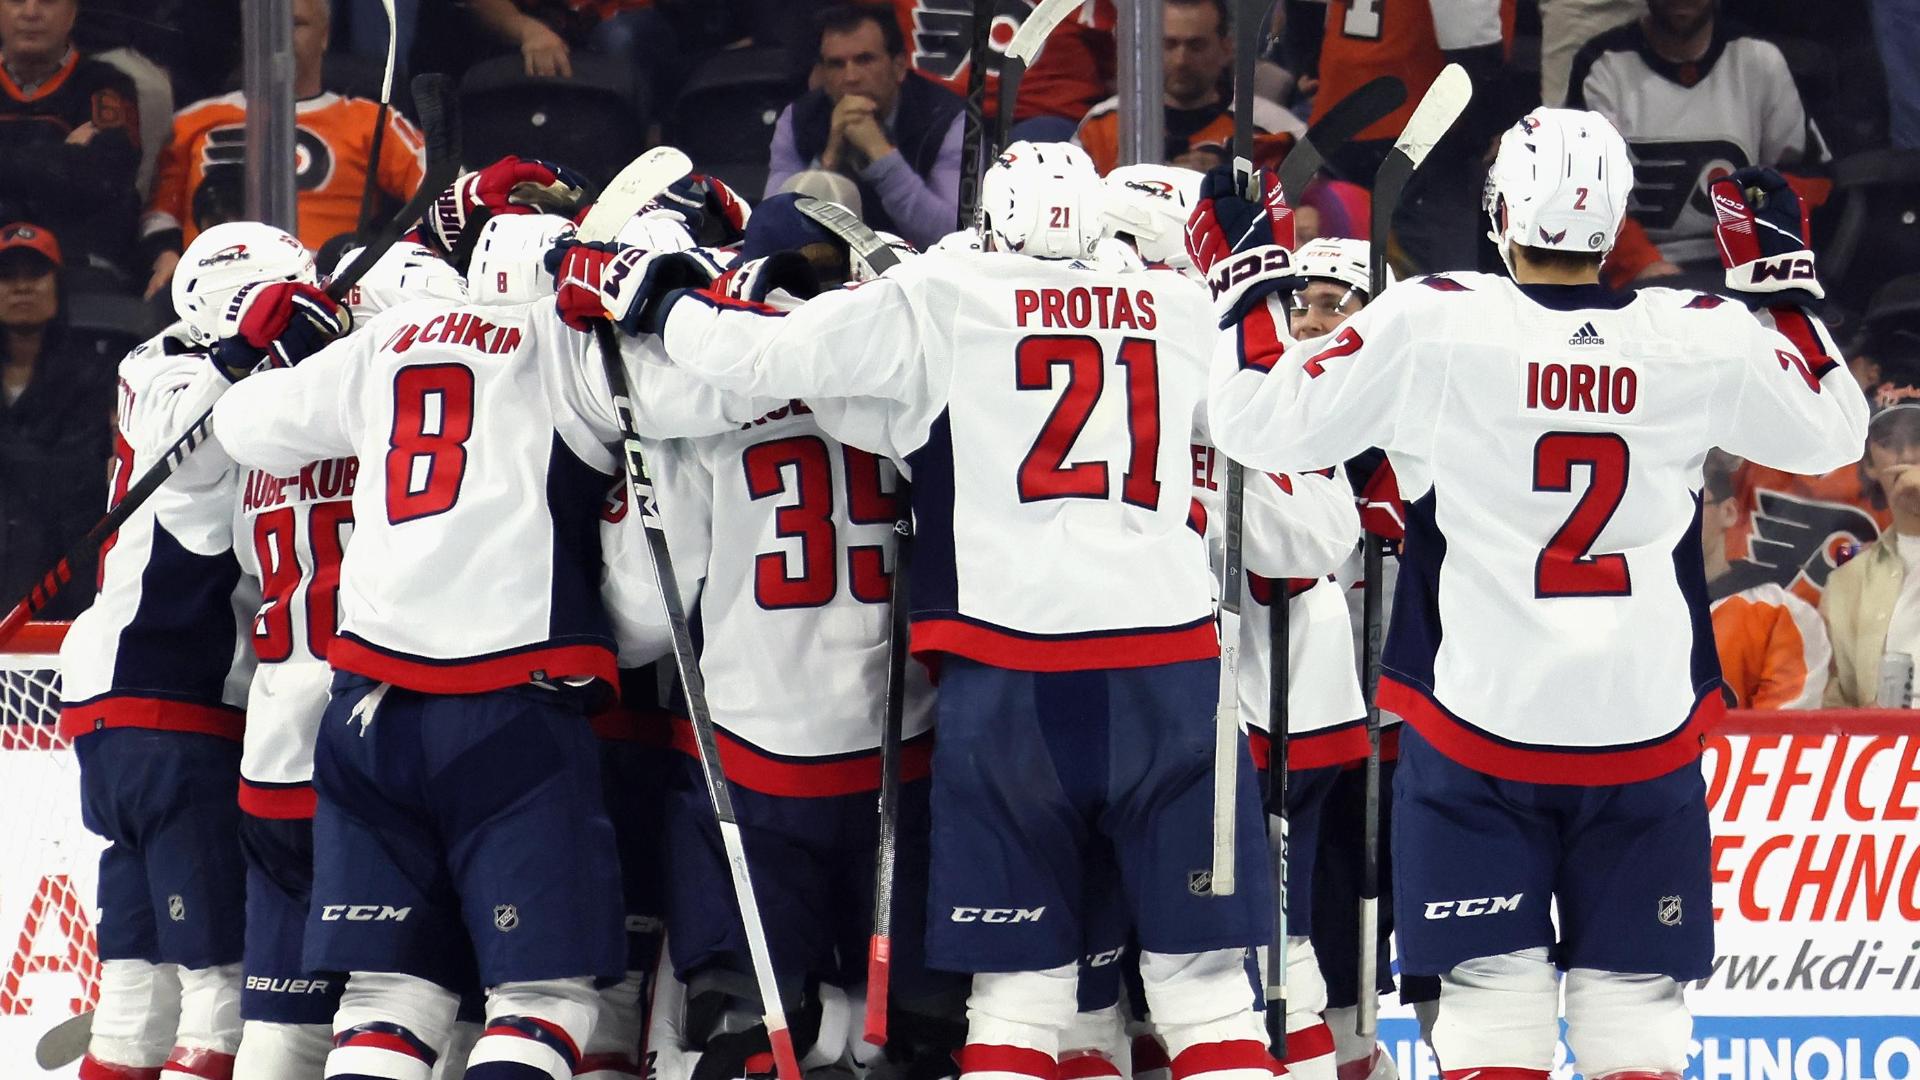 T.J. Oshie's winner on an empty net secures playoff berth for Caps